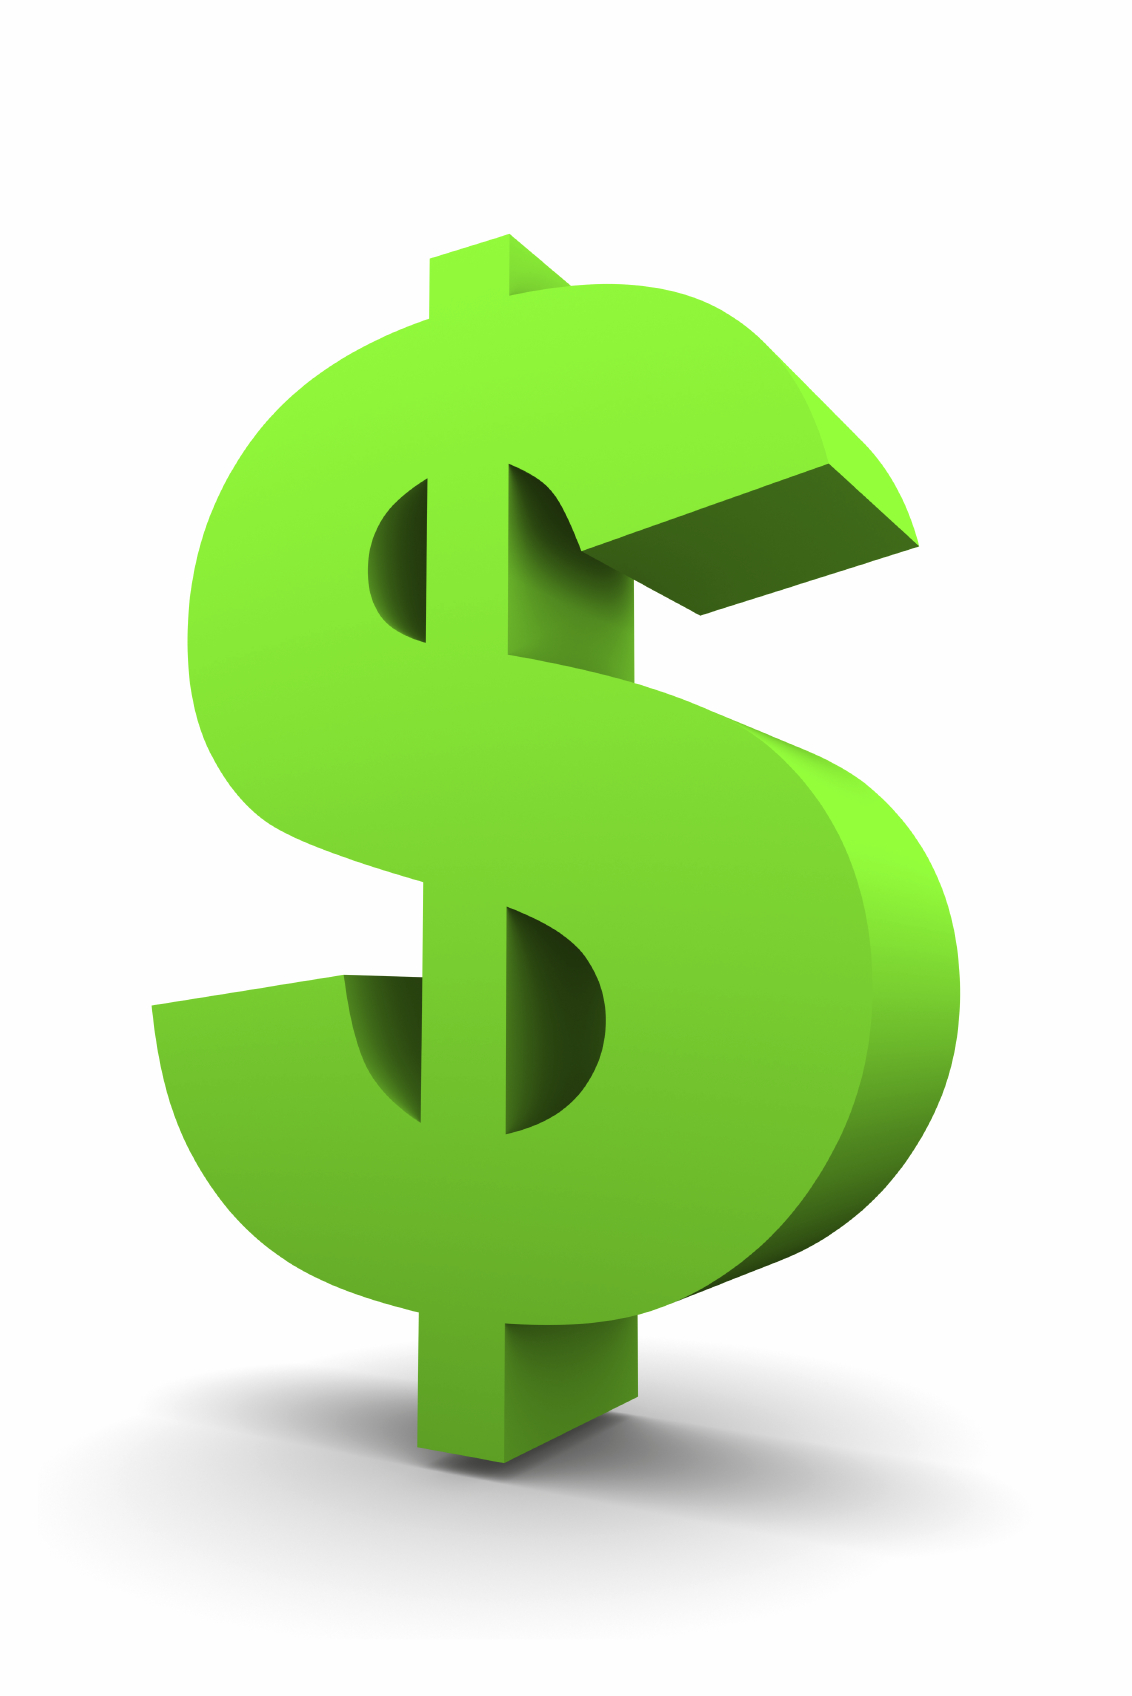 Picture Of A Money Sign | Free Download Clip Art | Free Clip Art ...